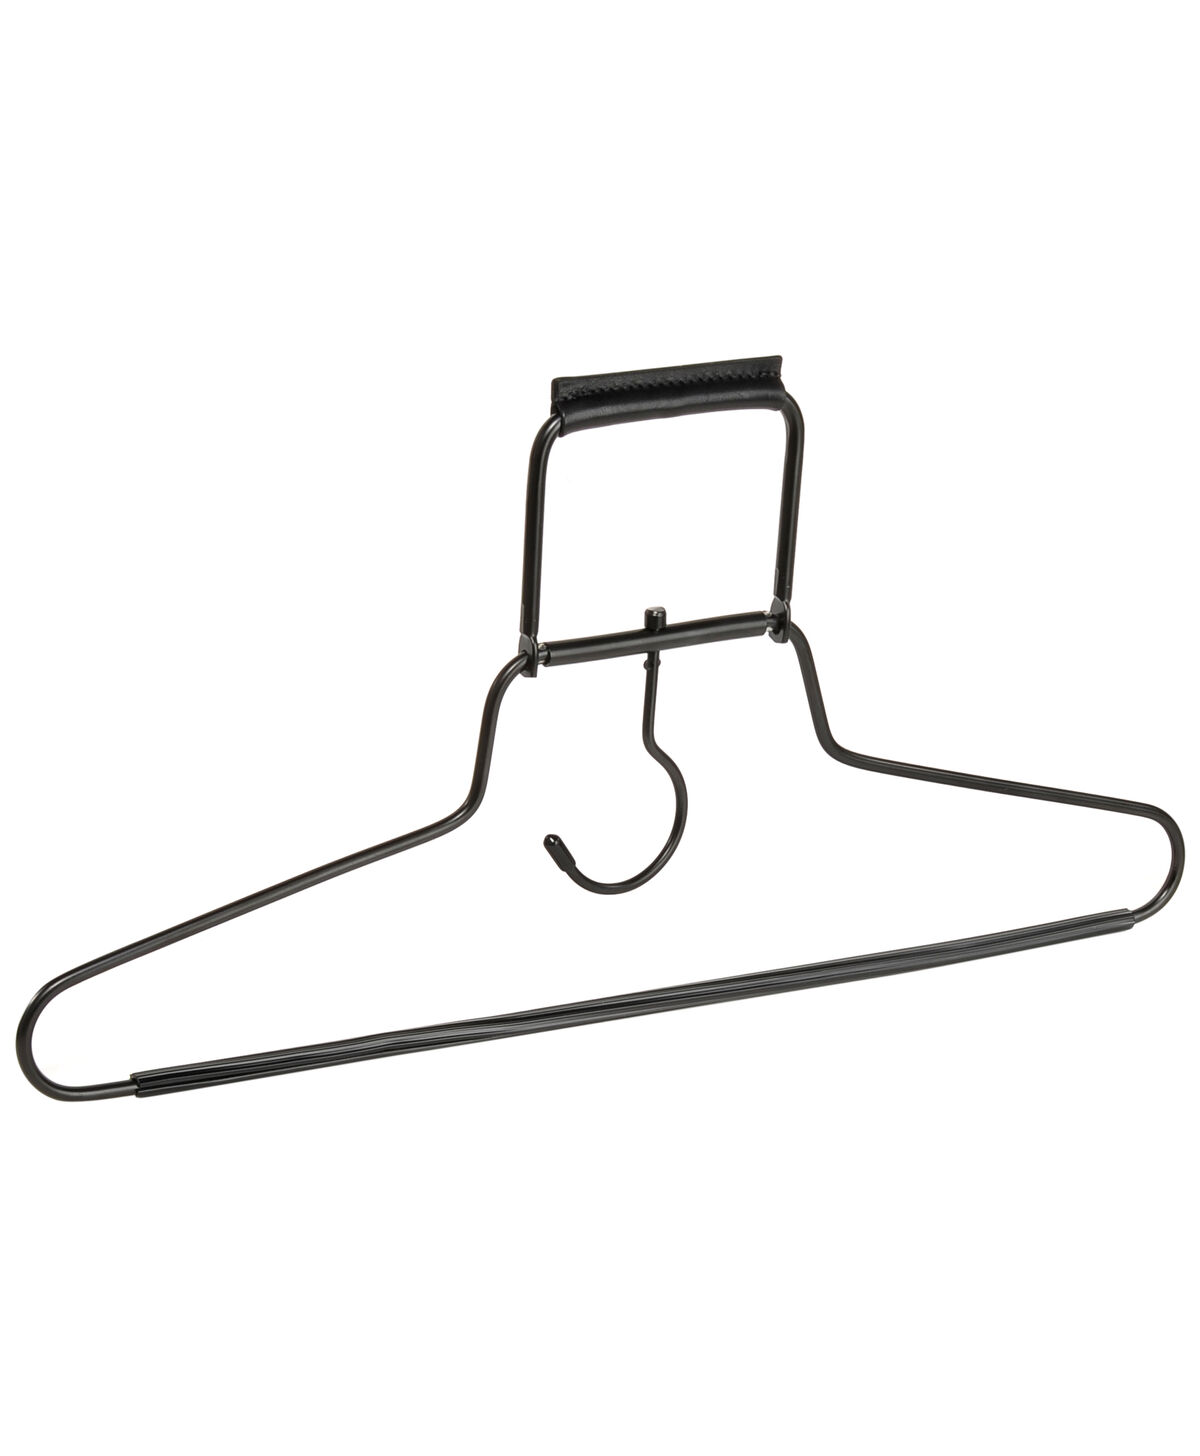 Tumi Replacement Parts REPLACEMENT HANGER 22130  Black